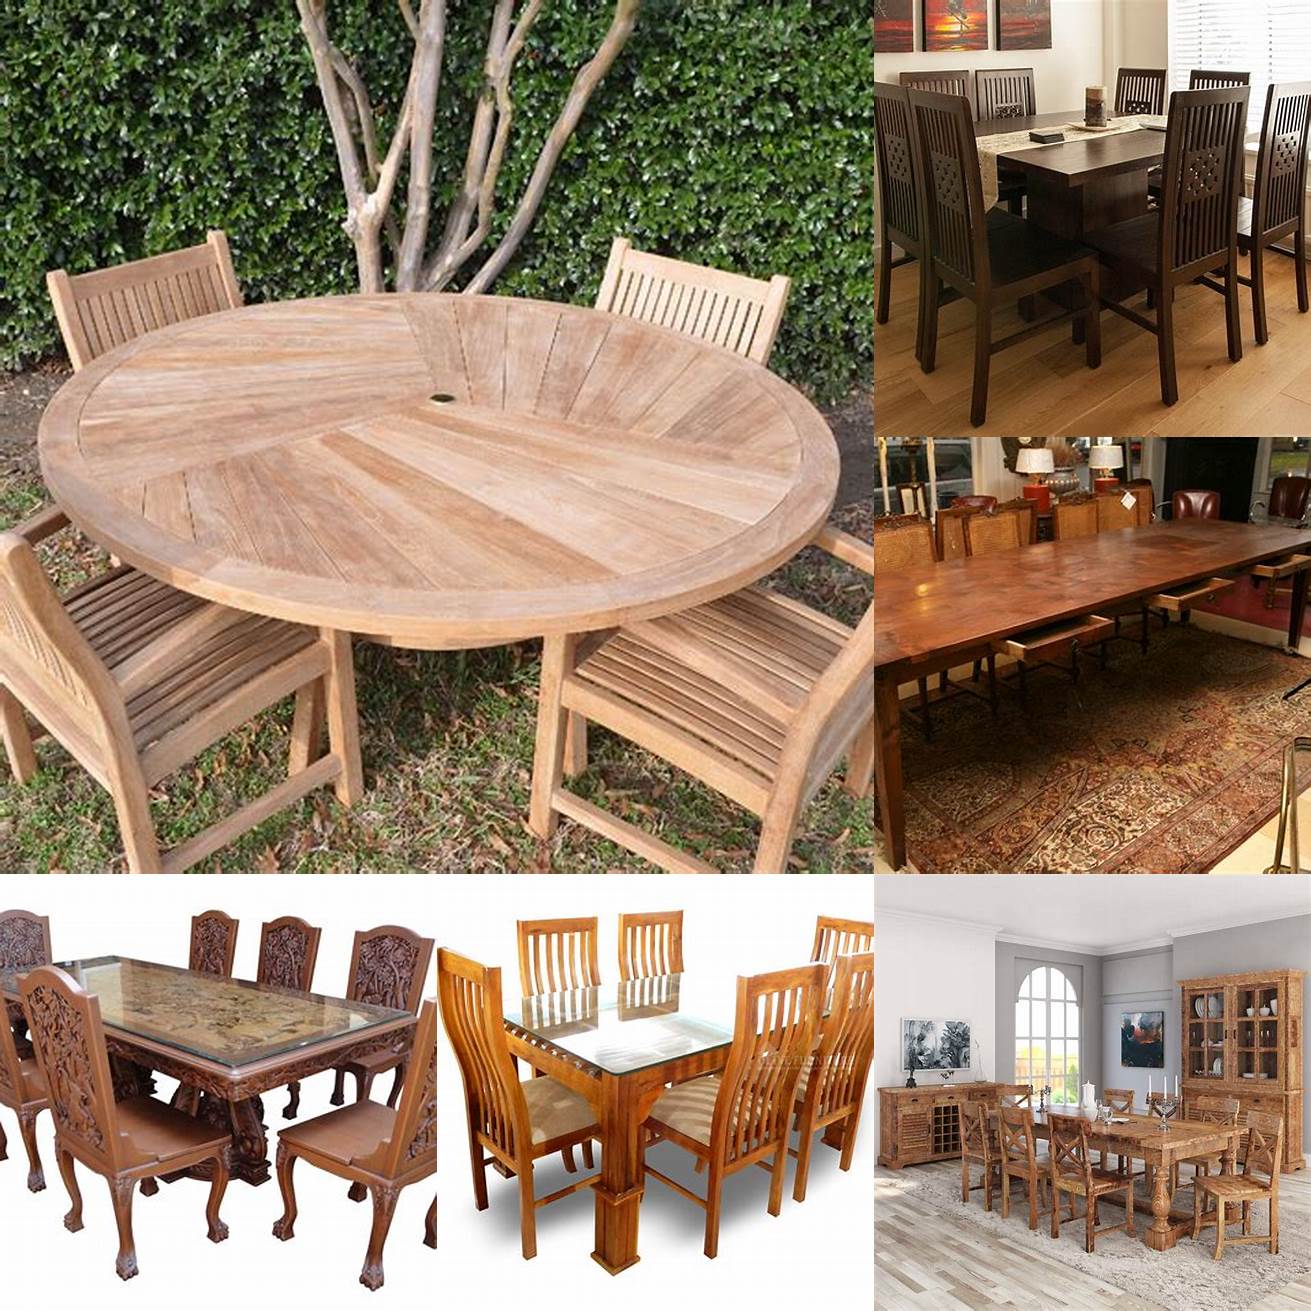 Teak Wood Dining Table with a Centerpiece